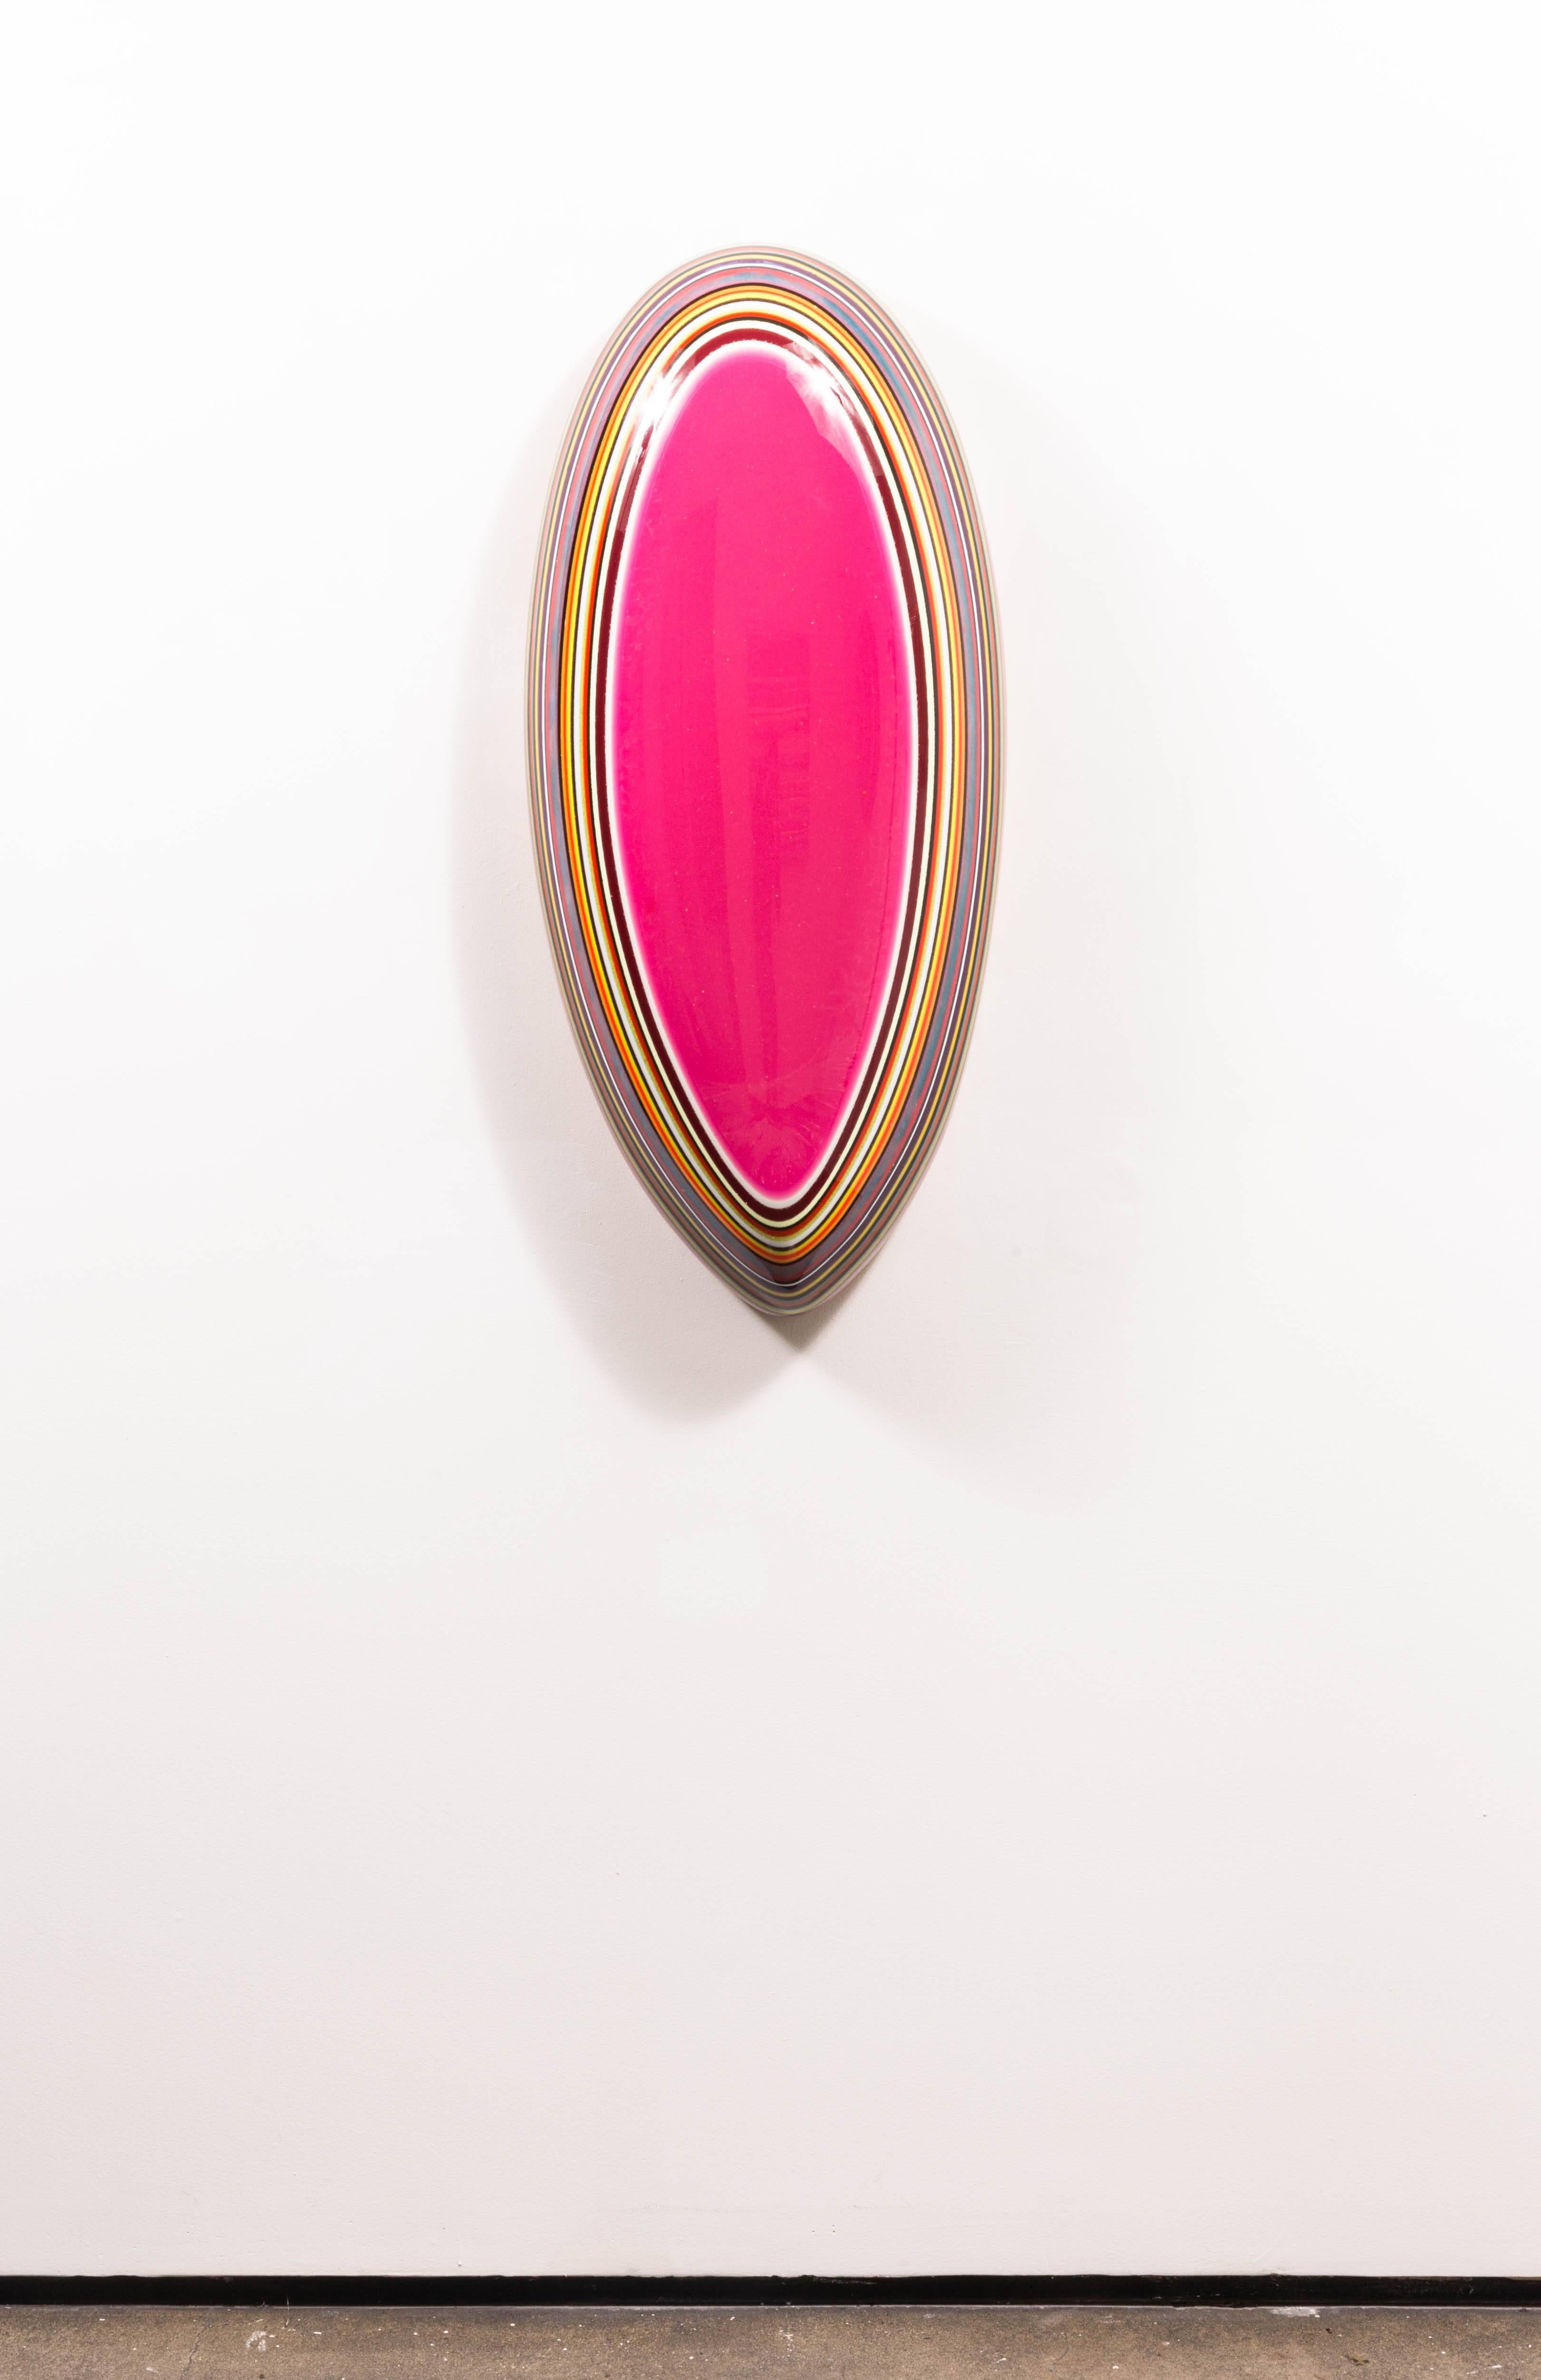 Resin on wood 39.2 x 17 x 8.2 inches (100 x 43 x 21 cm)
Droplet, oval sculpture in hot pink, mounted in tropical wood frame. Multi-colour resin layers. 

Presenting a dichotomy of weight and levity, the work of Schmitz-Schmelzer transforms